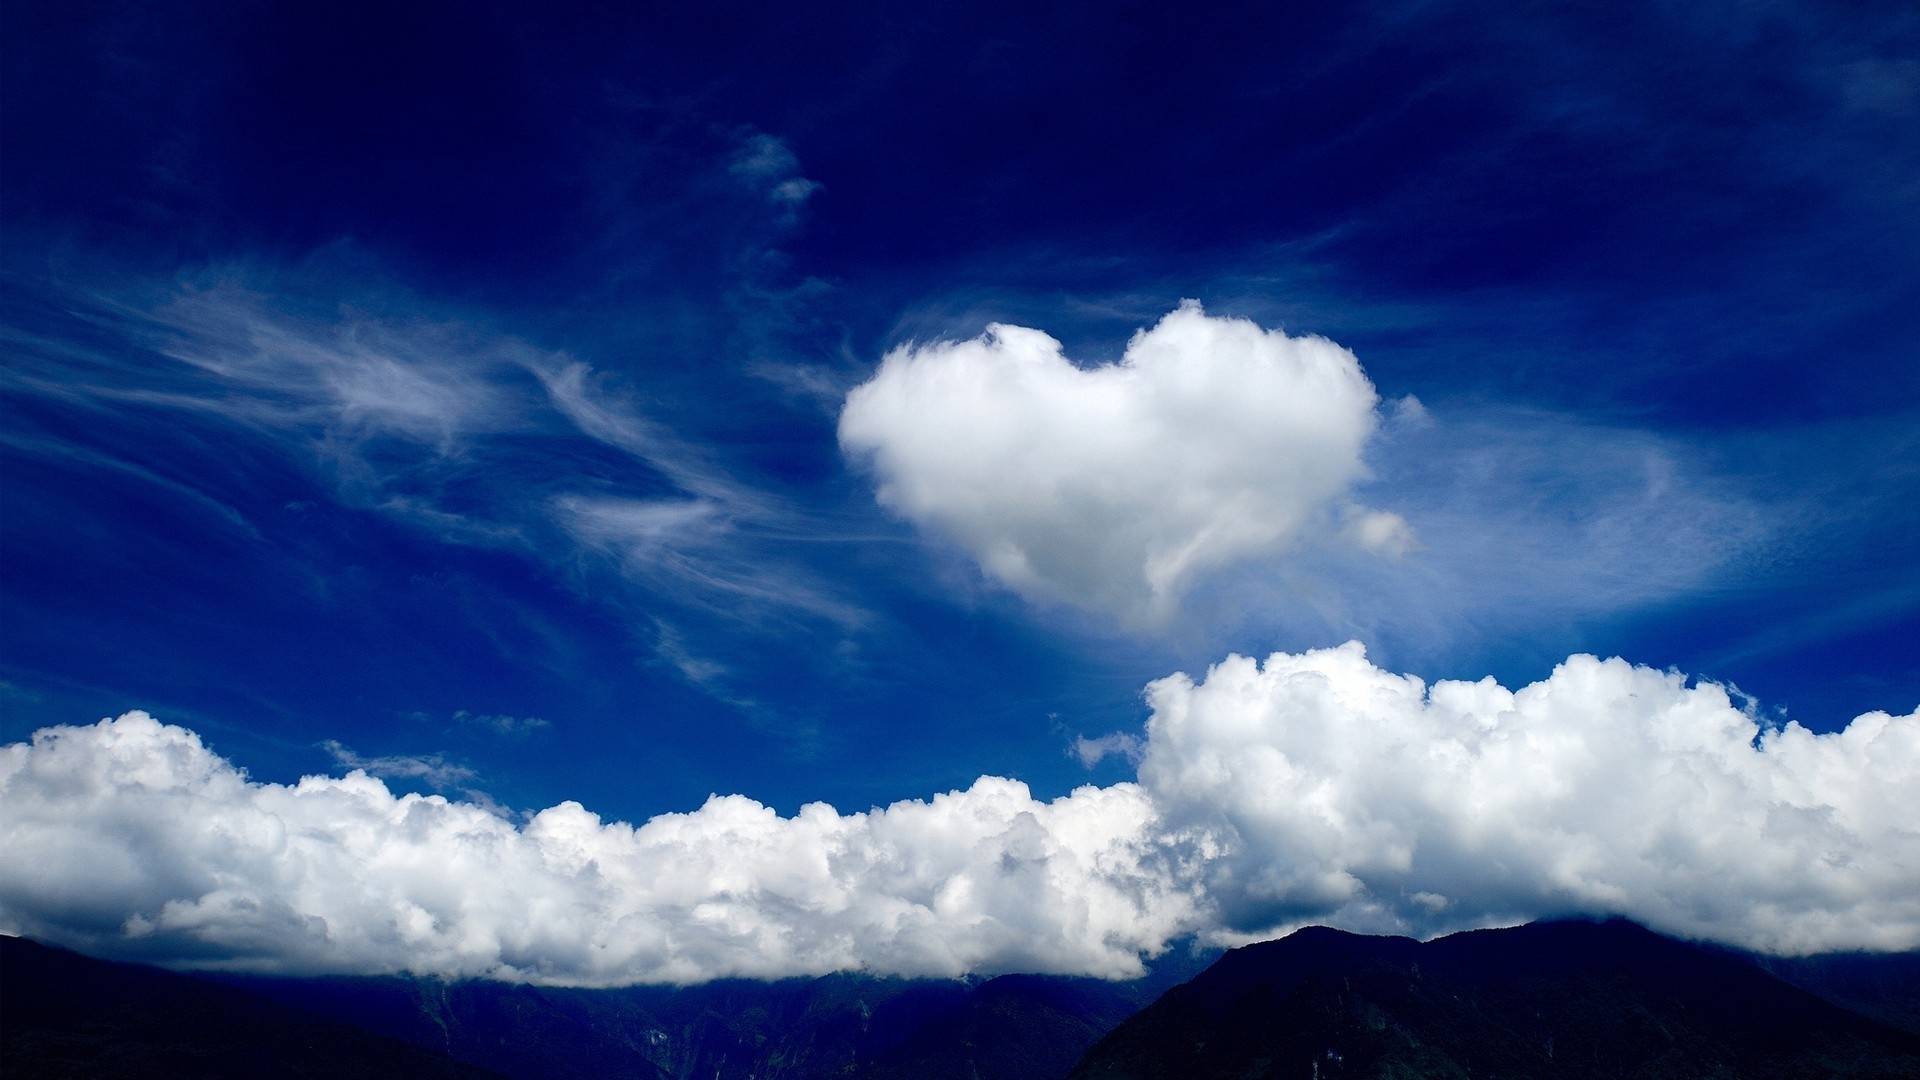 Clouds Heart for 1920 x 1080 HDTV 1080p resolution